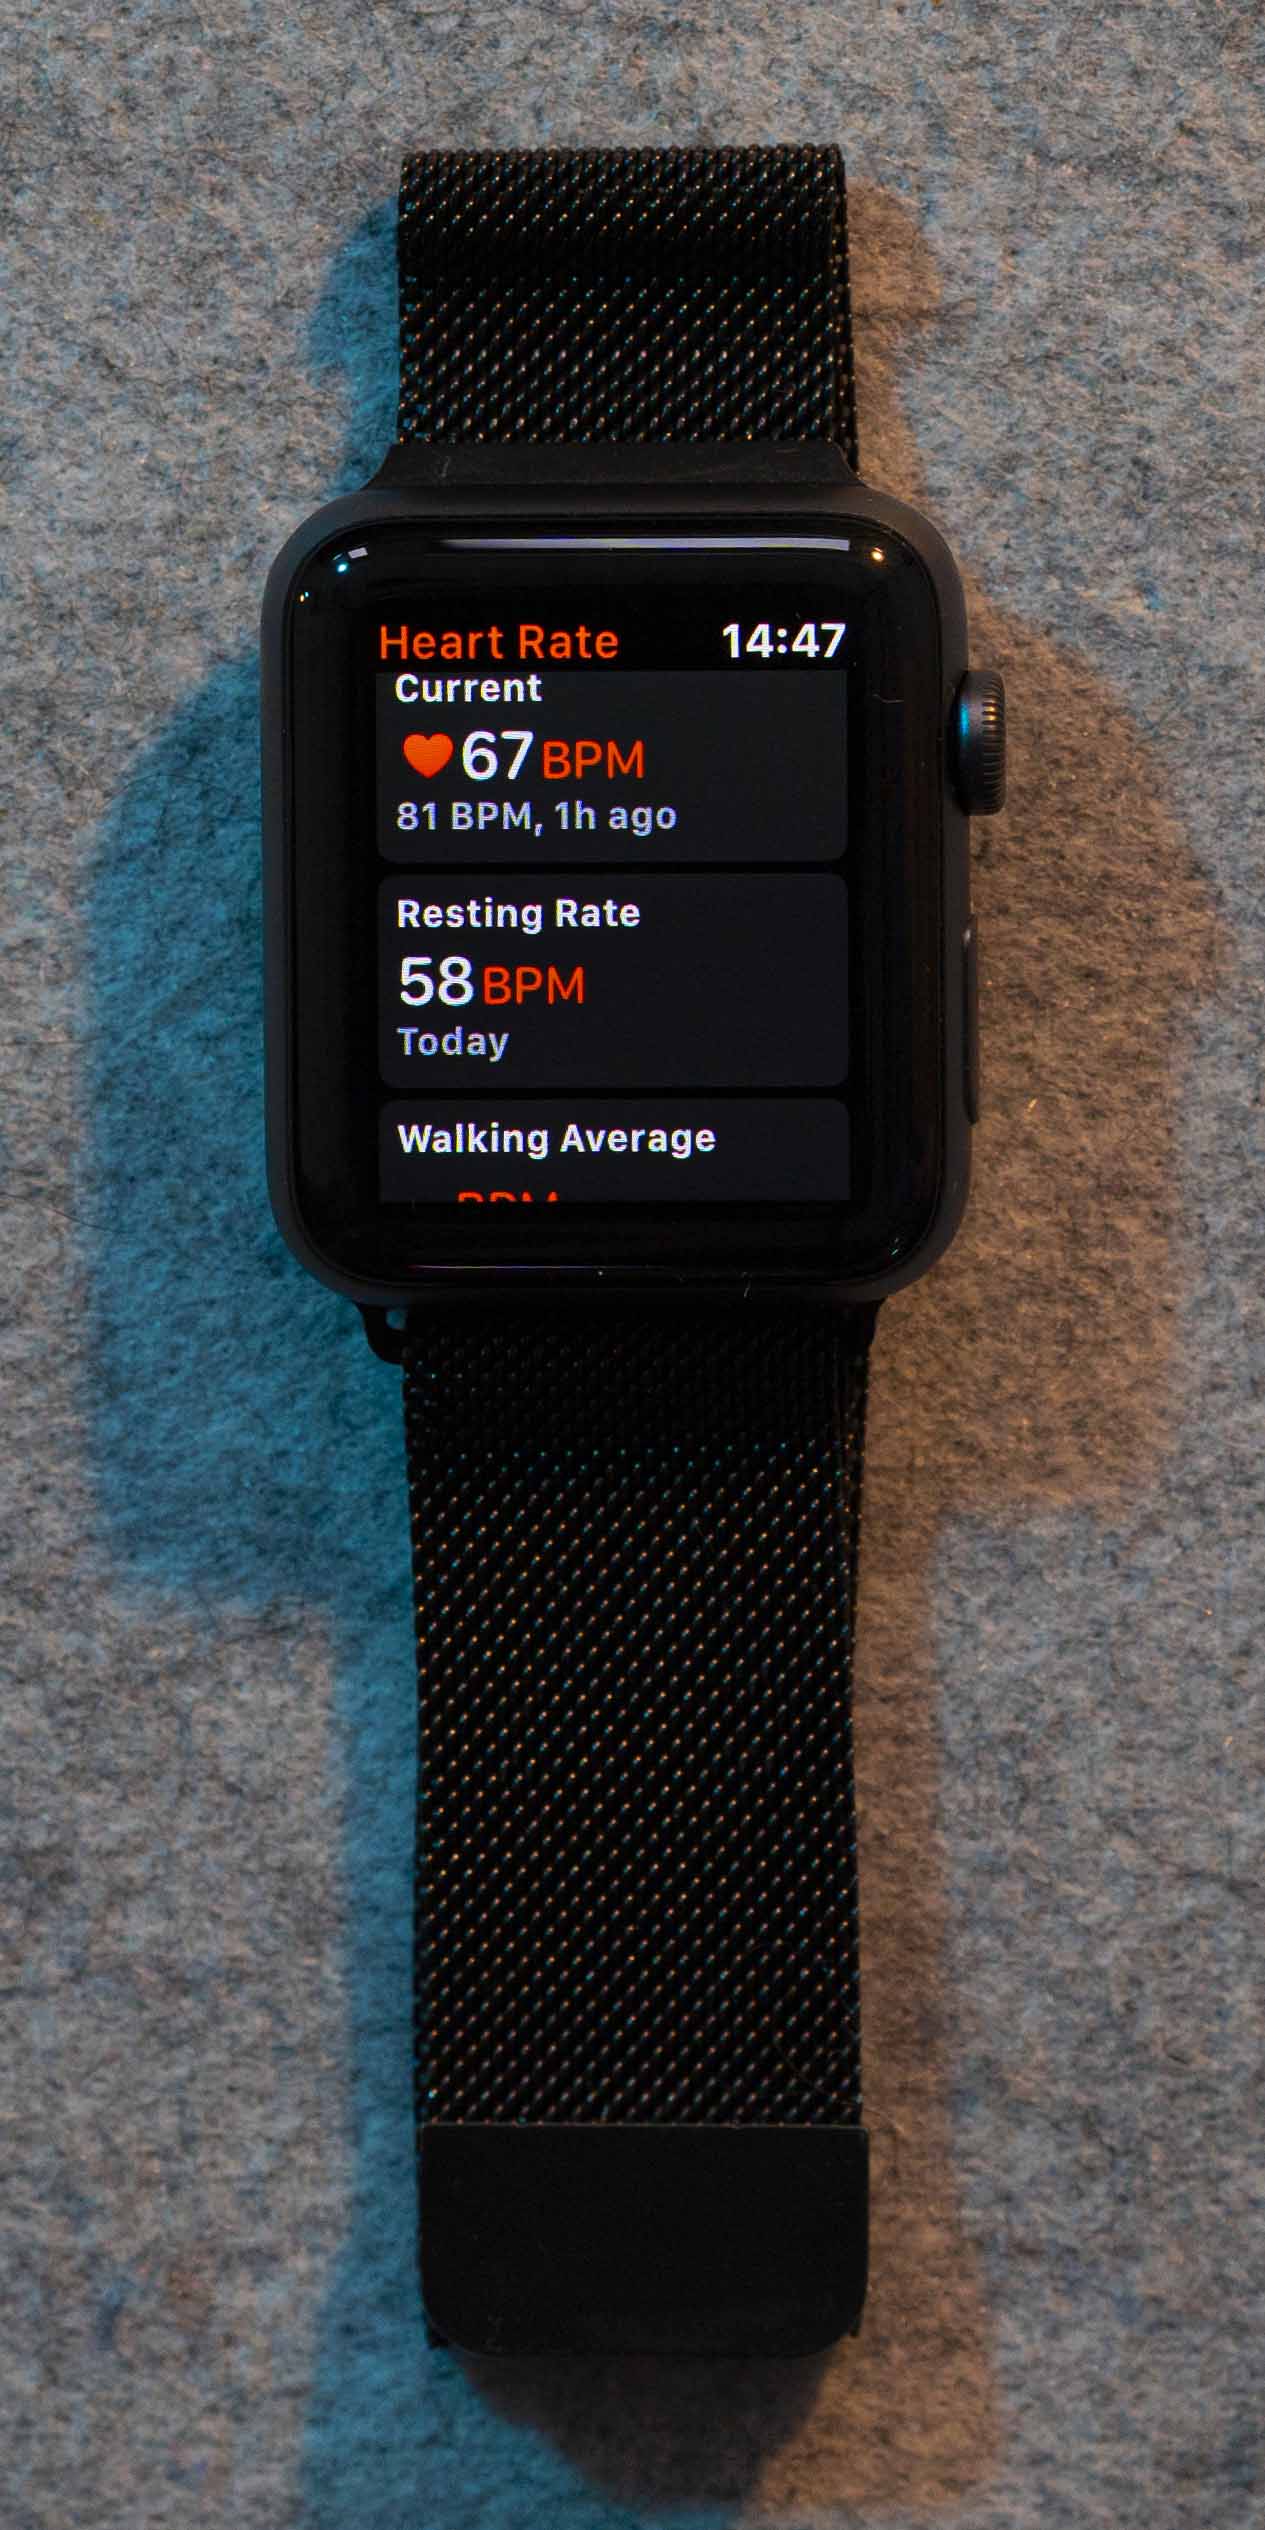 /images/blogPost/appleWatch/heartrate.jpg